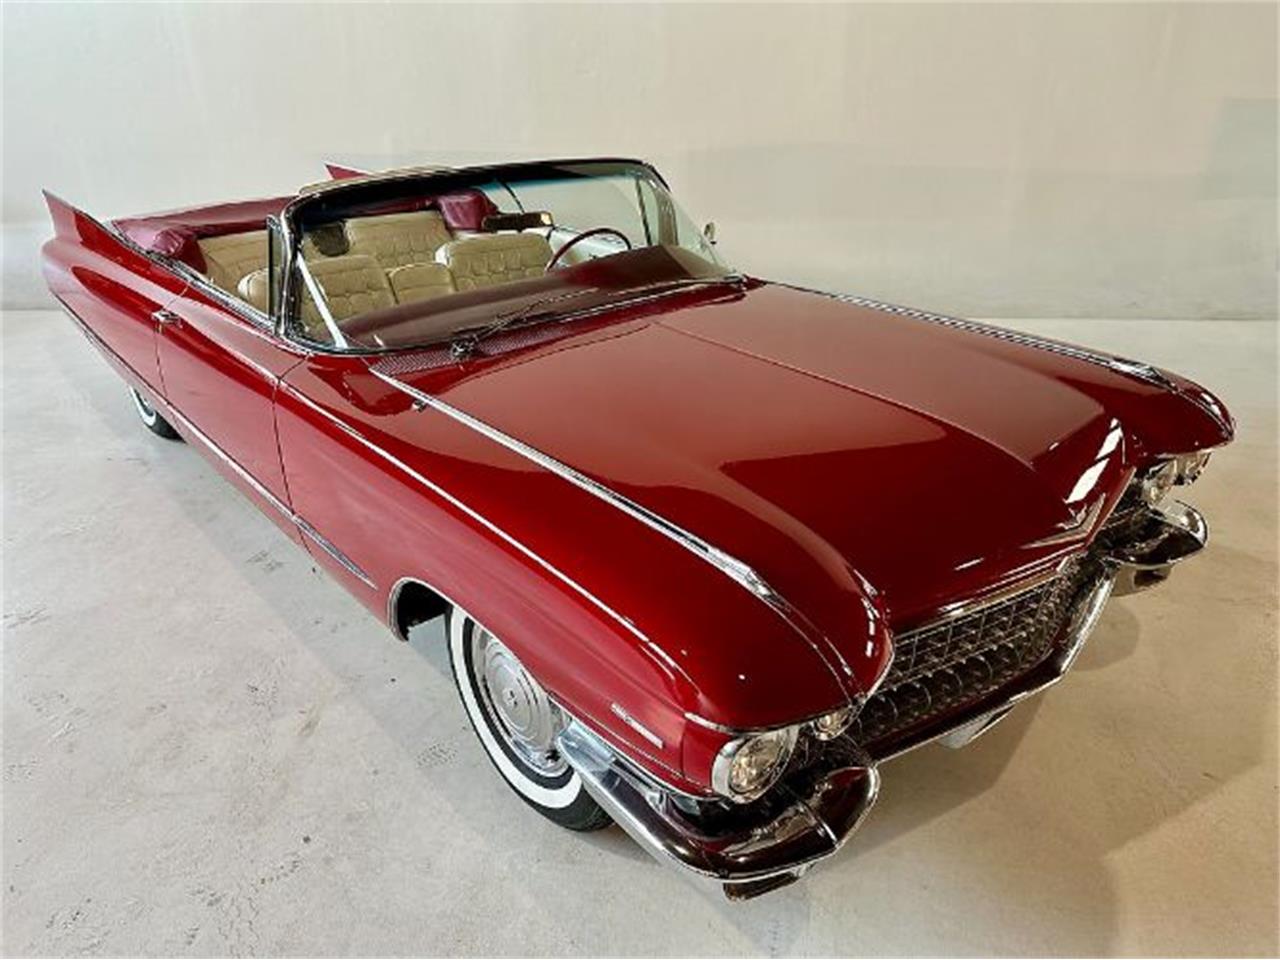 For Sale: 1960 Cadillac Series 62 in Cadillac, Michigan for sale in Cadillac, MI